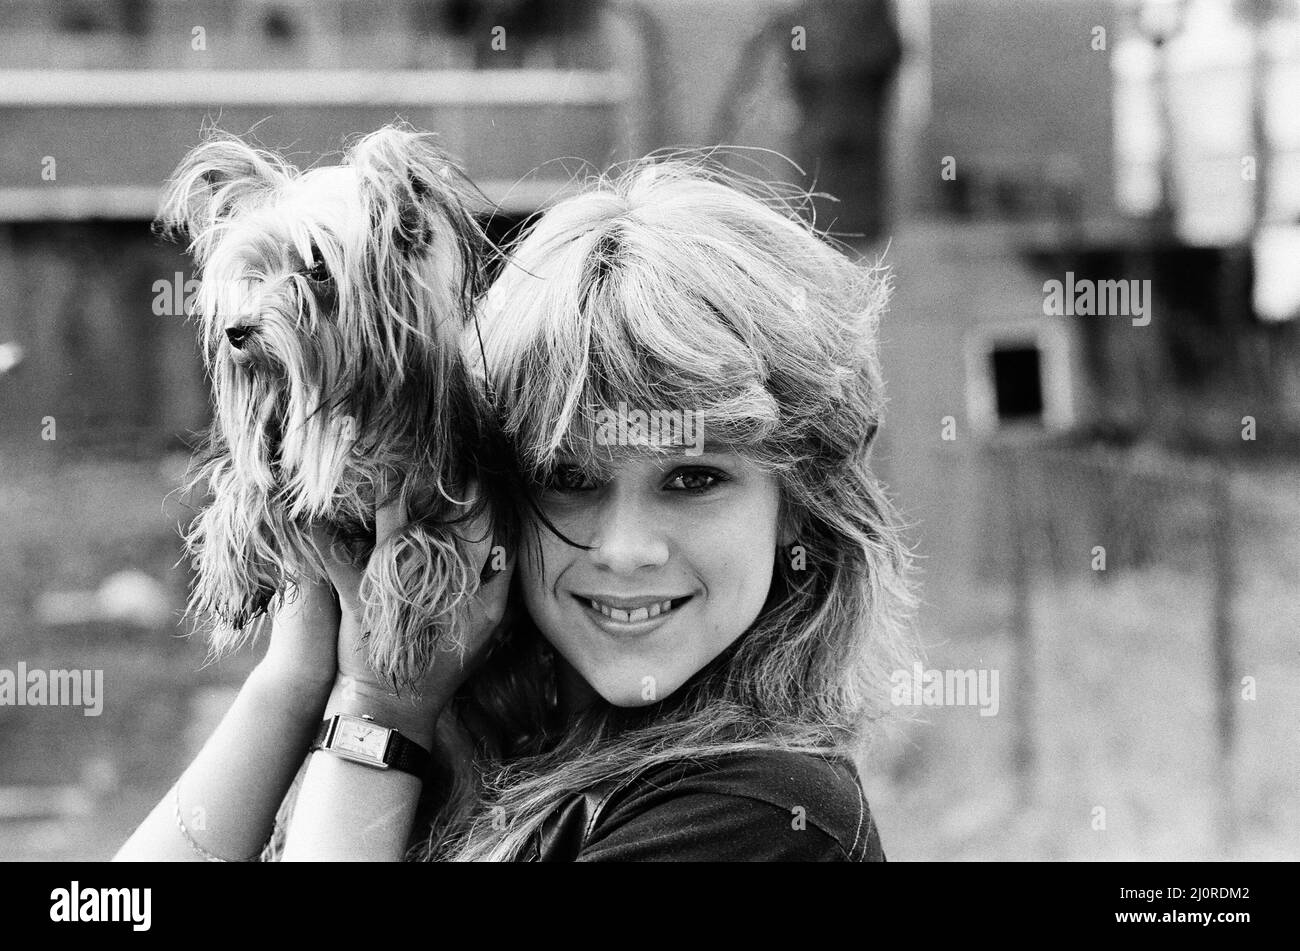 Samantha Fox contestant Miss Sunday People competition, aged 16 years old, pictured with pet dog at home January 1983.  a.k.a.  Sam Fox  *** Local Caption *** Sam Fox Stock Photo